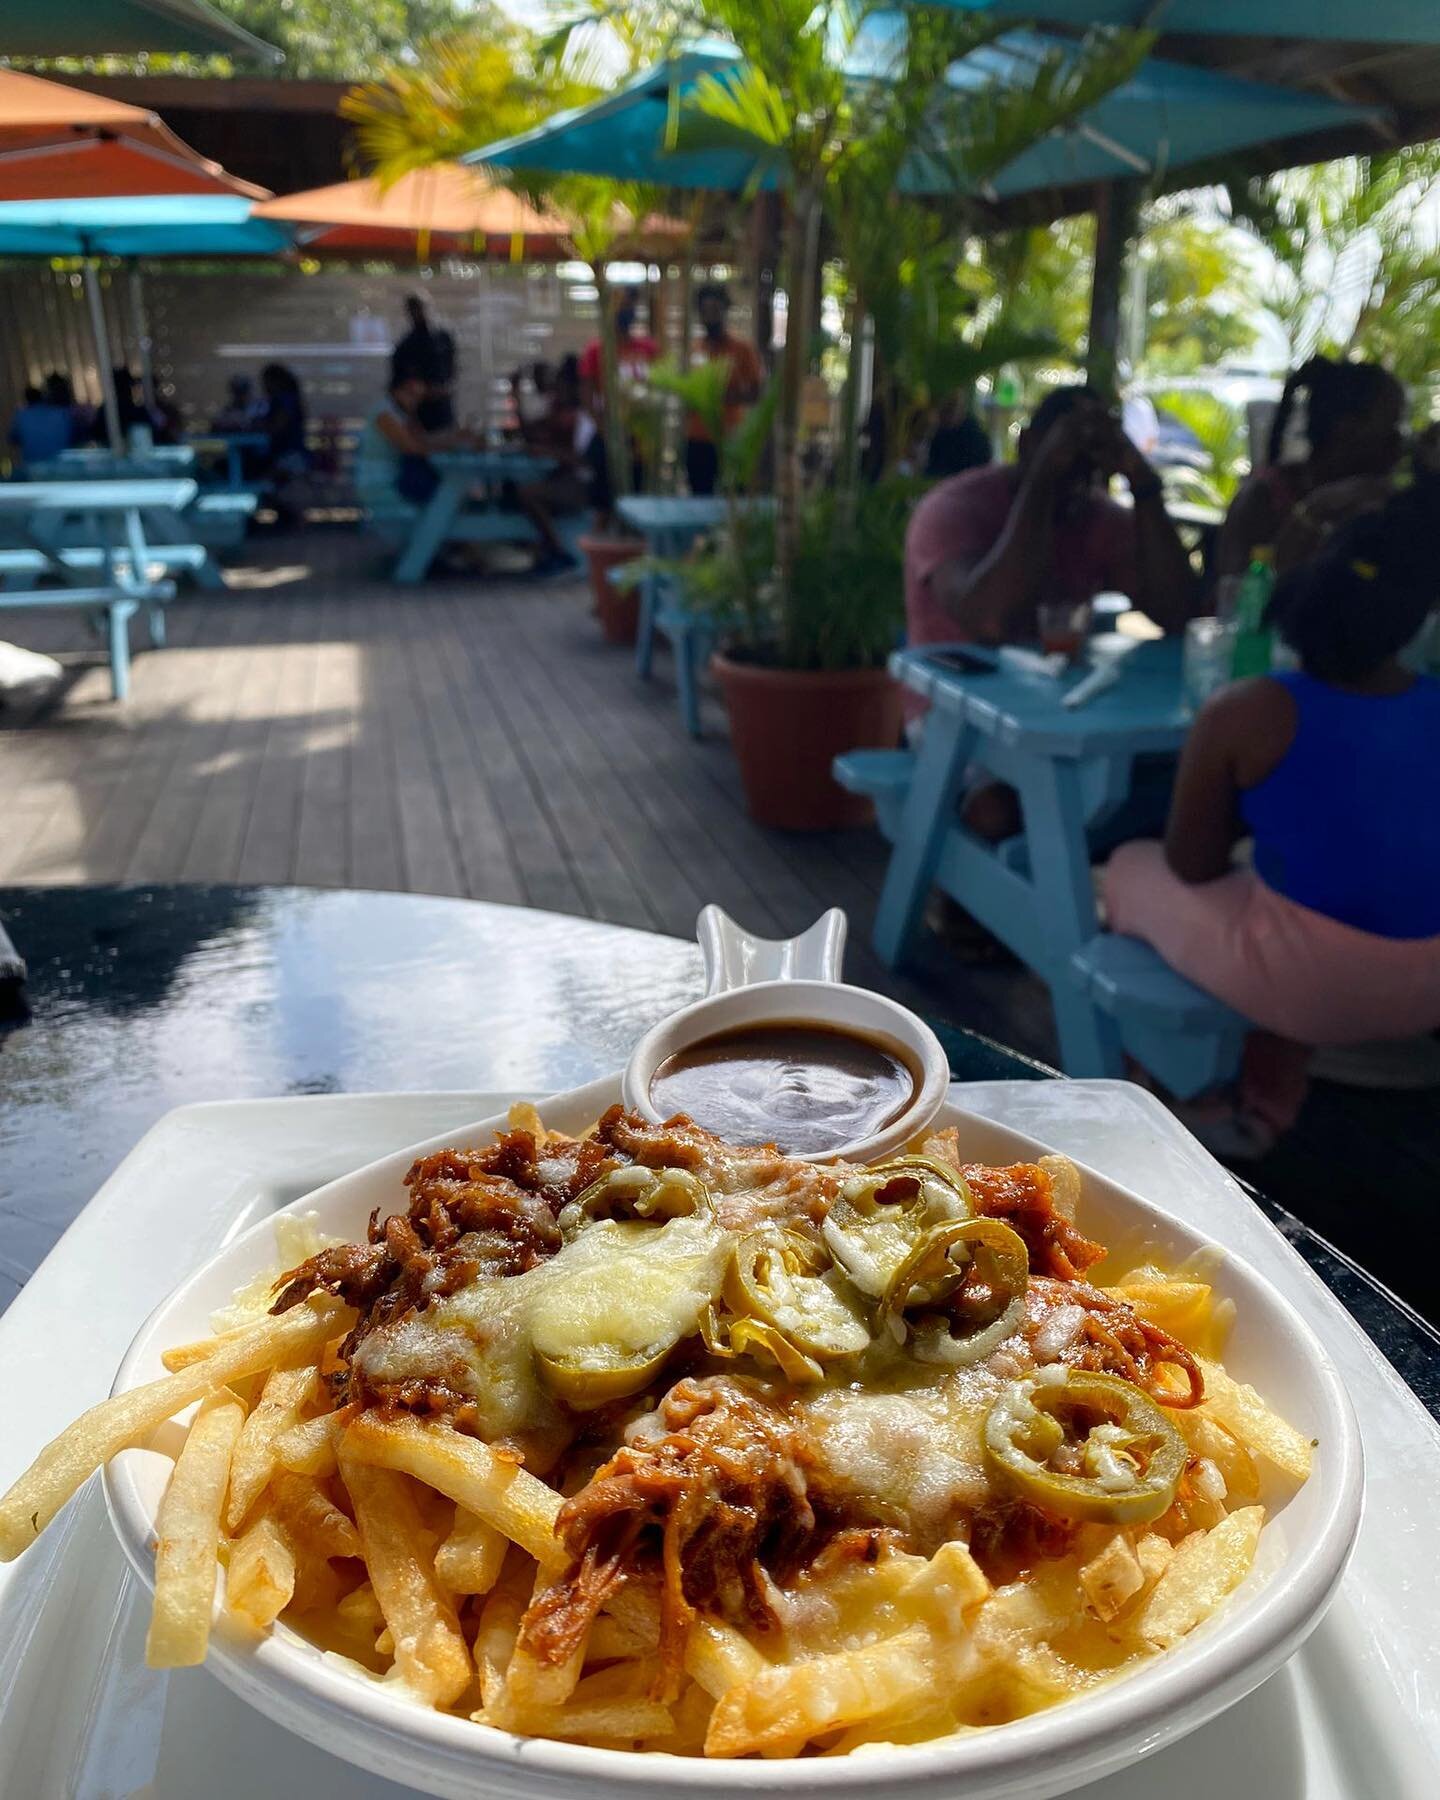 Loaded fries and vibes 😋😎